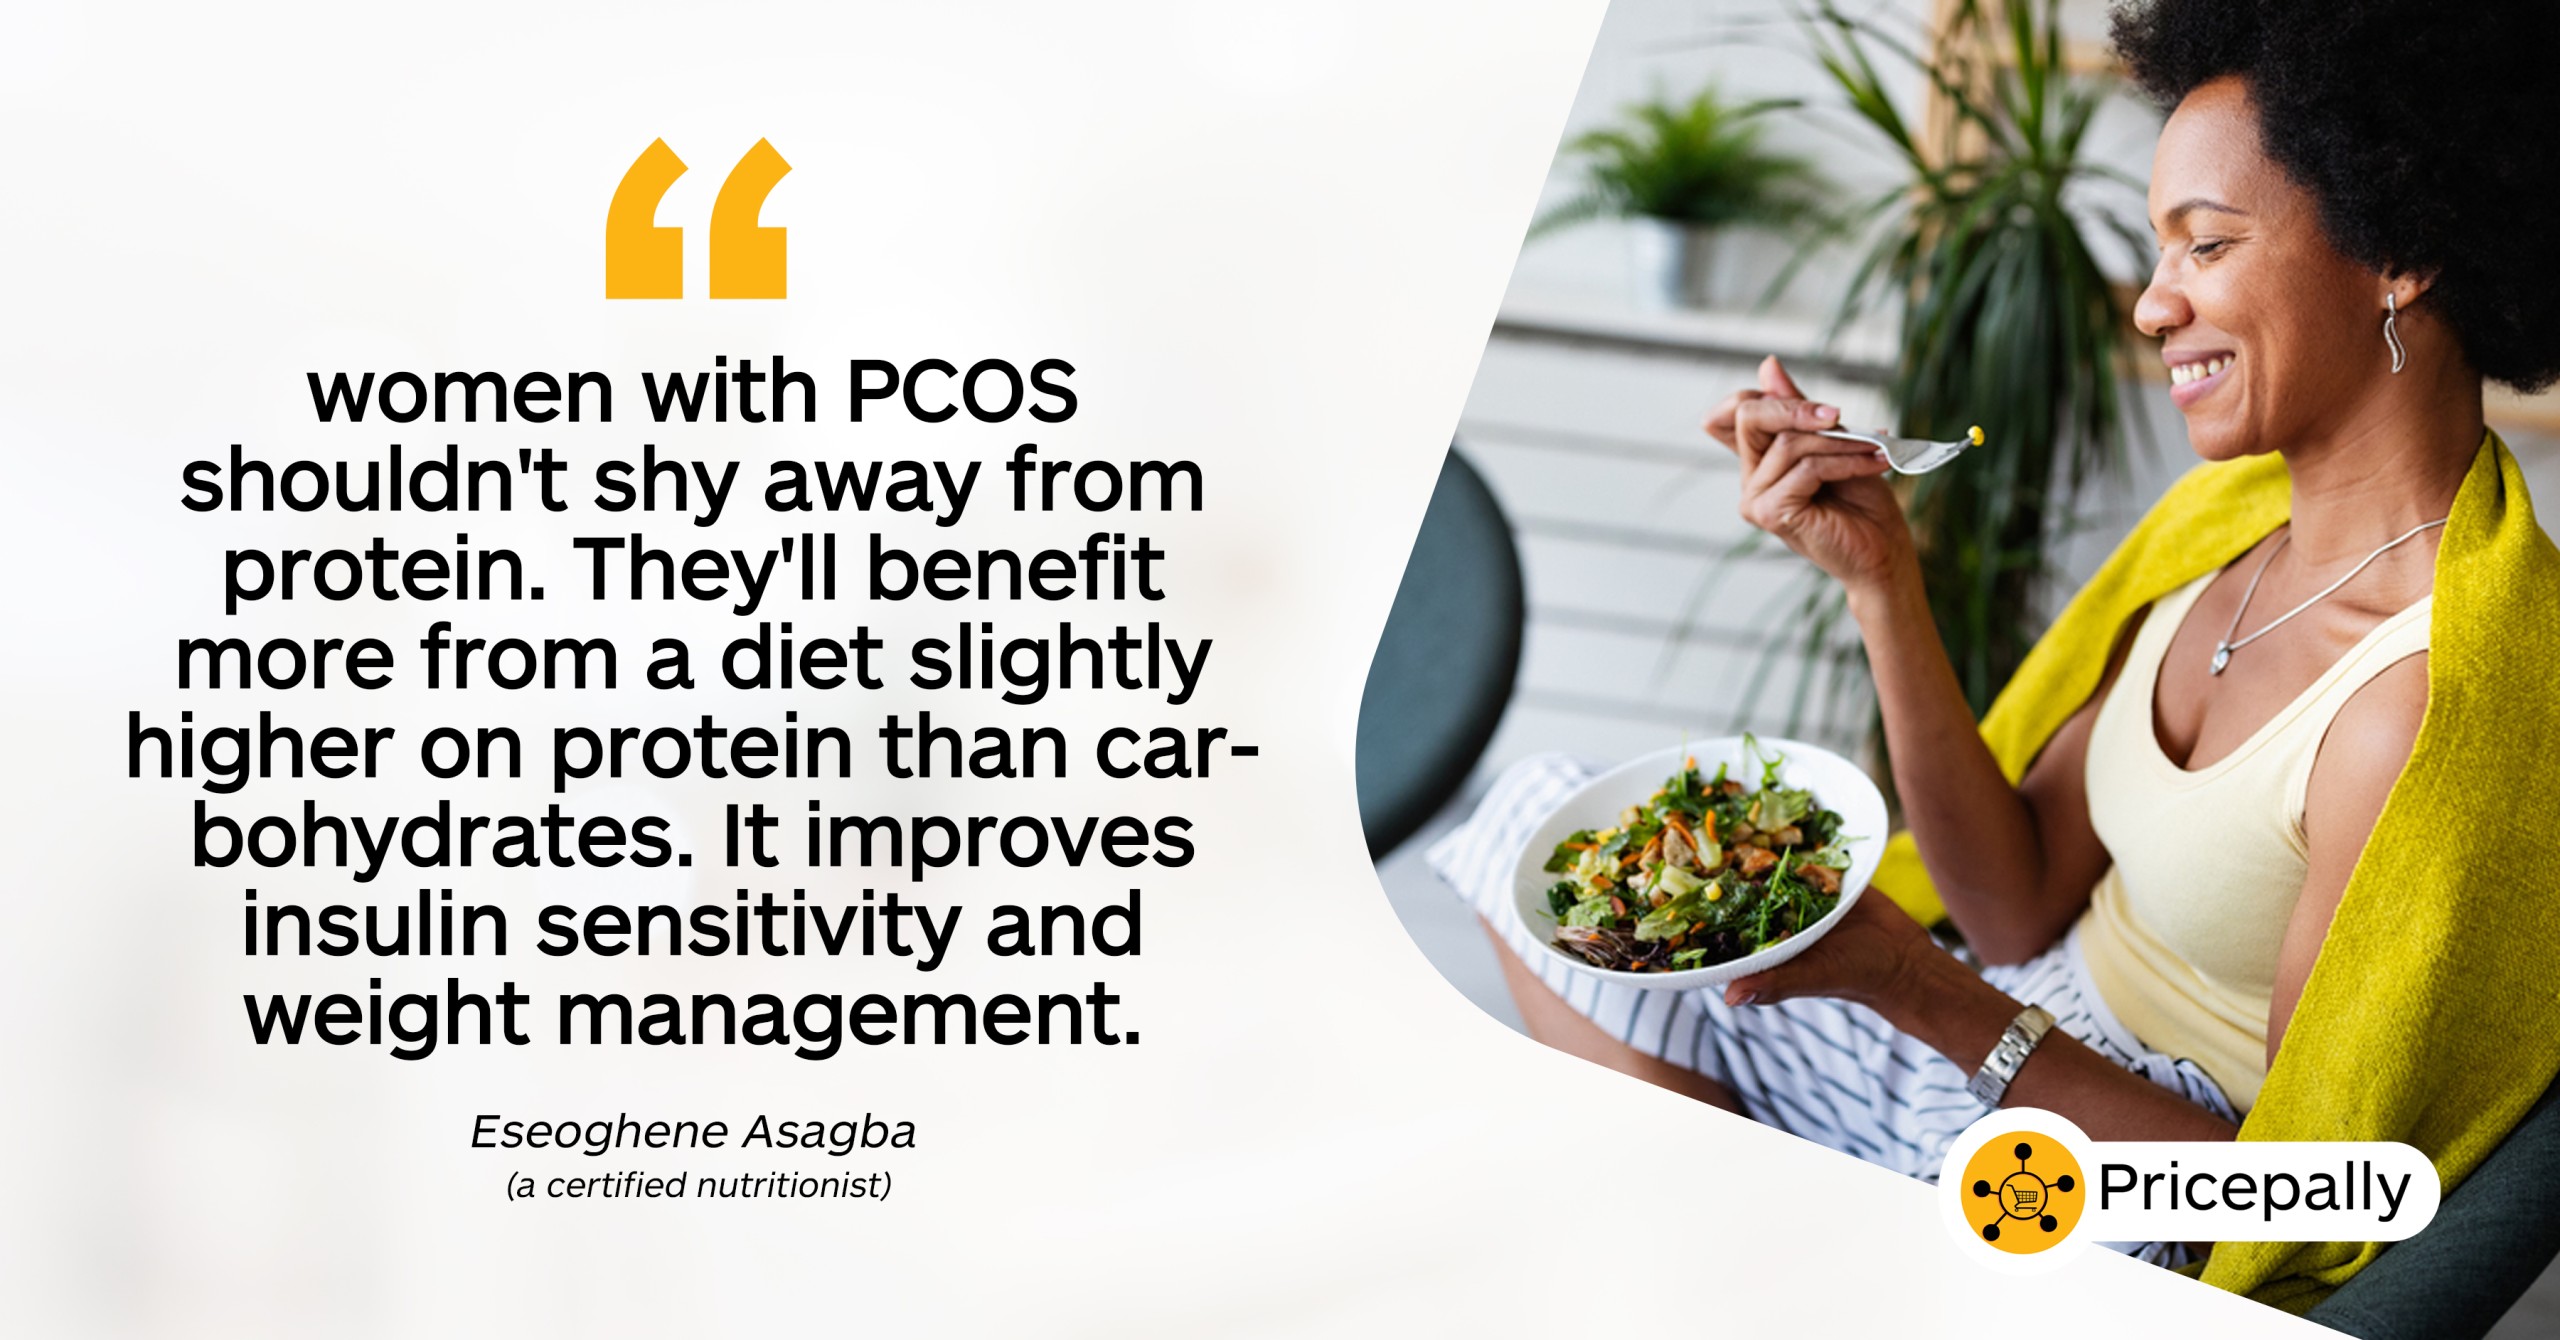 Eseogehene Asagba, a certified nutritionist, explains why women with PCOS women must elevate protein intake in their diet. 